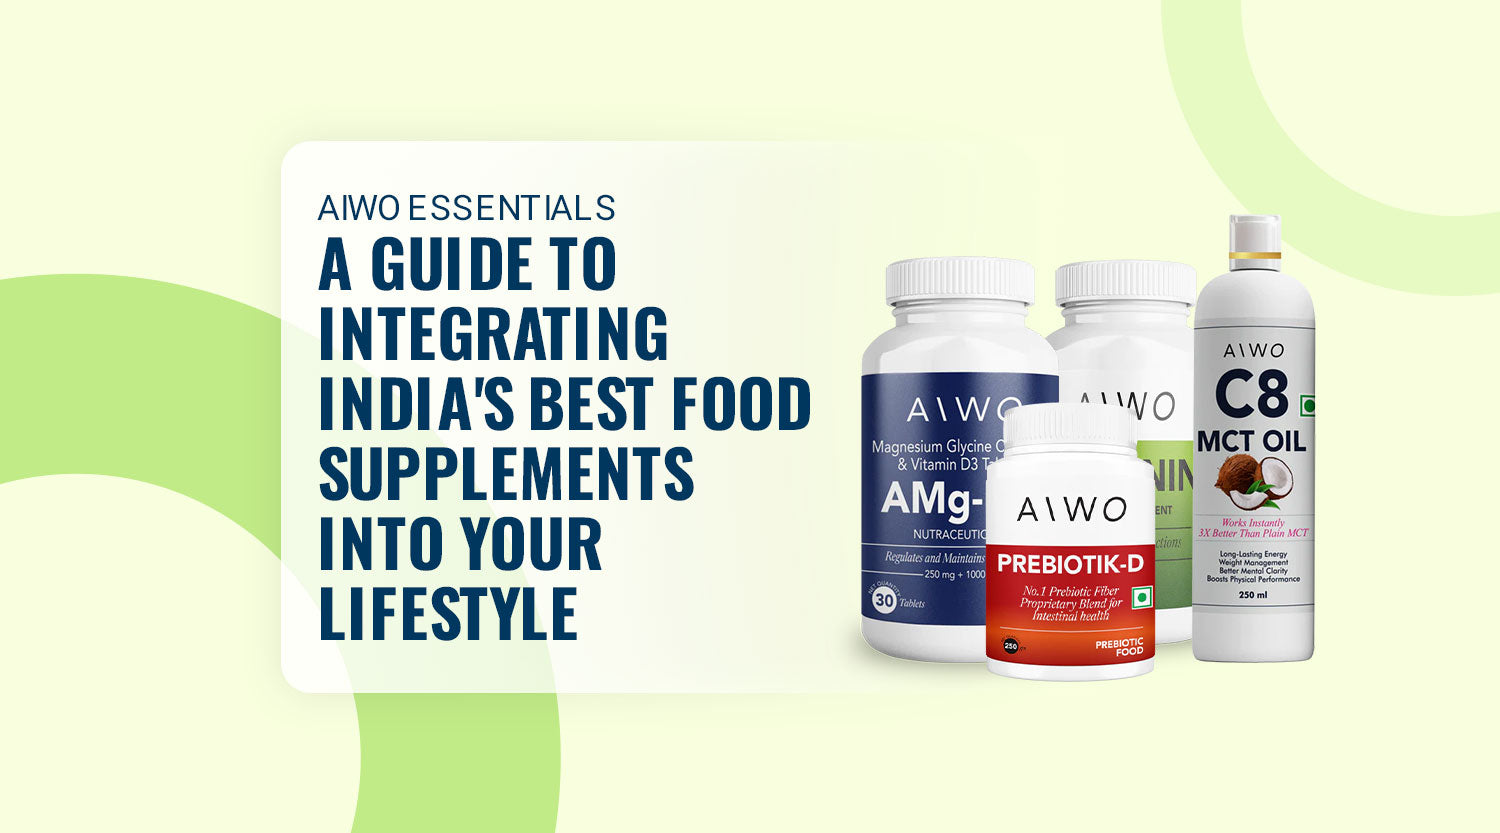 AIWO Essentials: A Guide to Integrating India's Best Food Supplements into Your Lifestyle